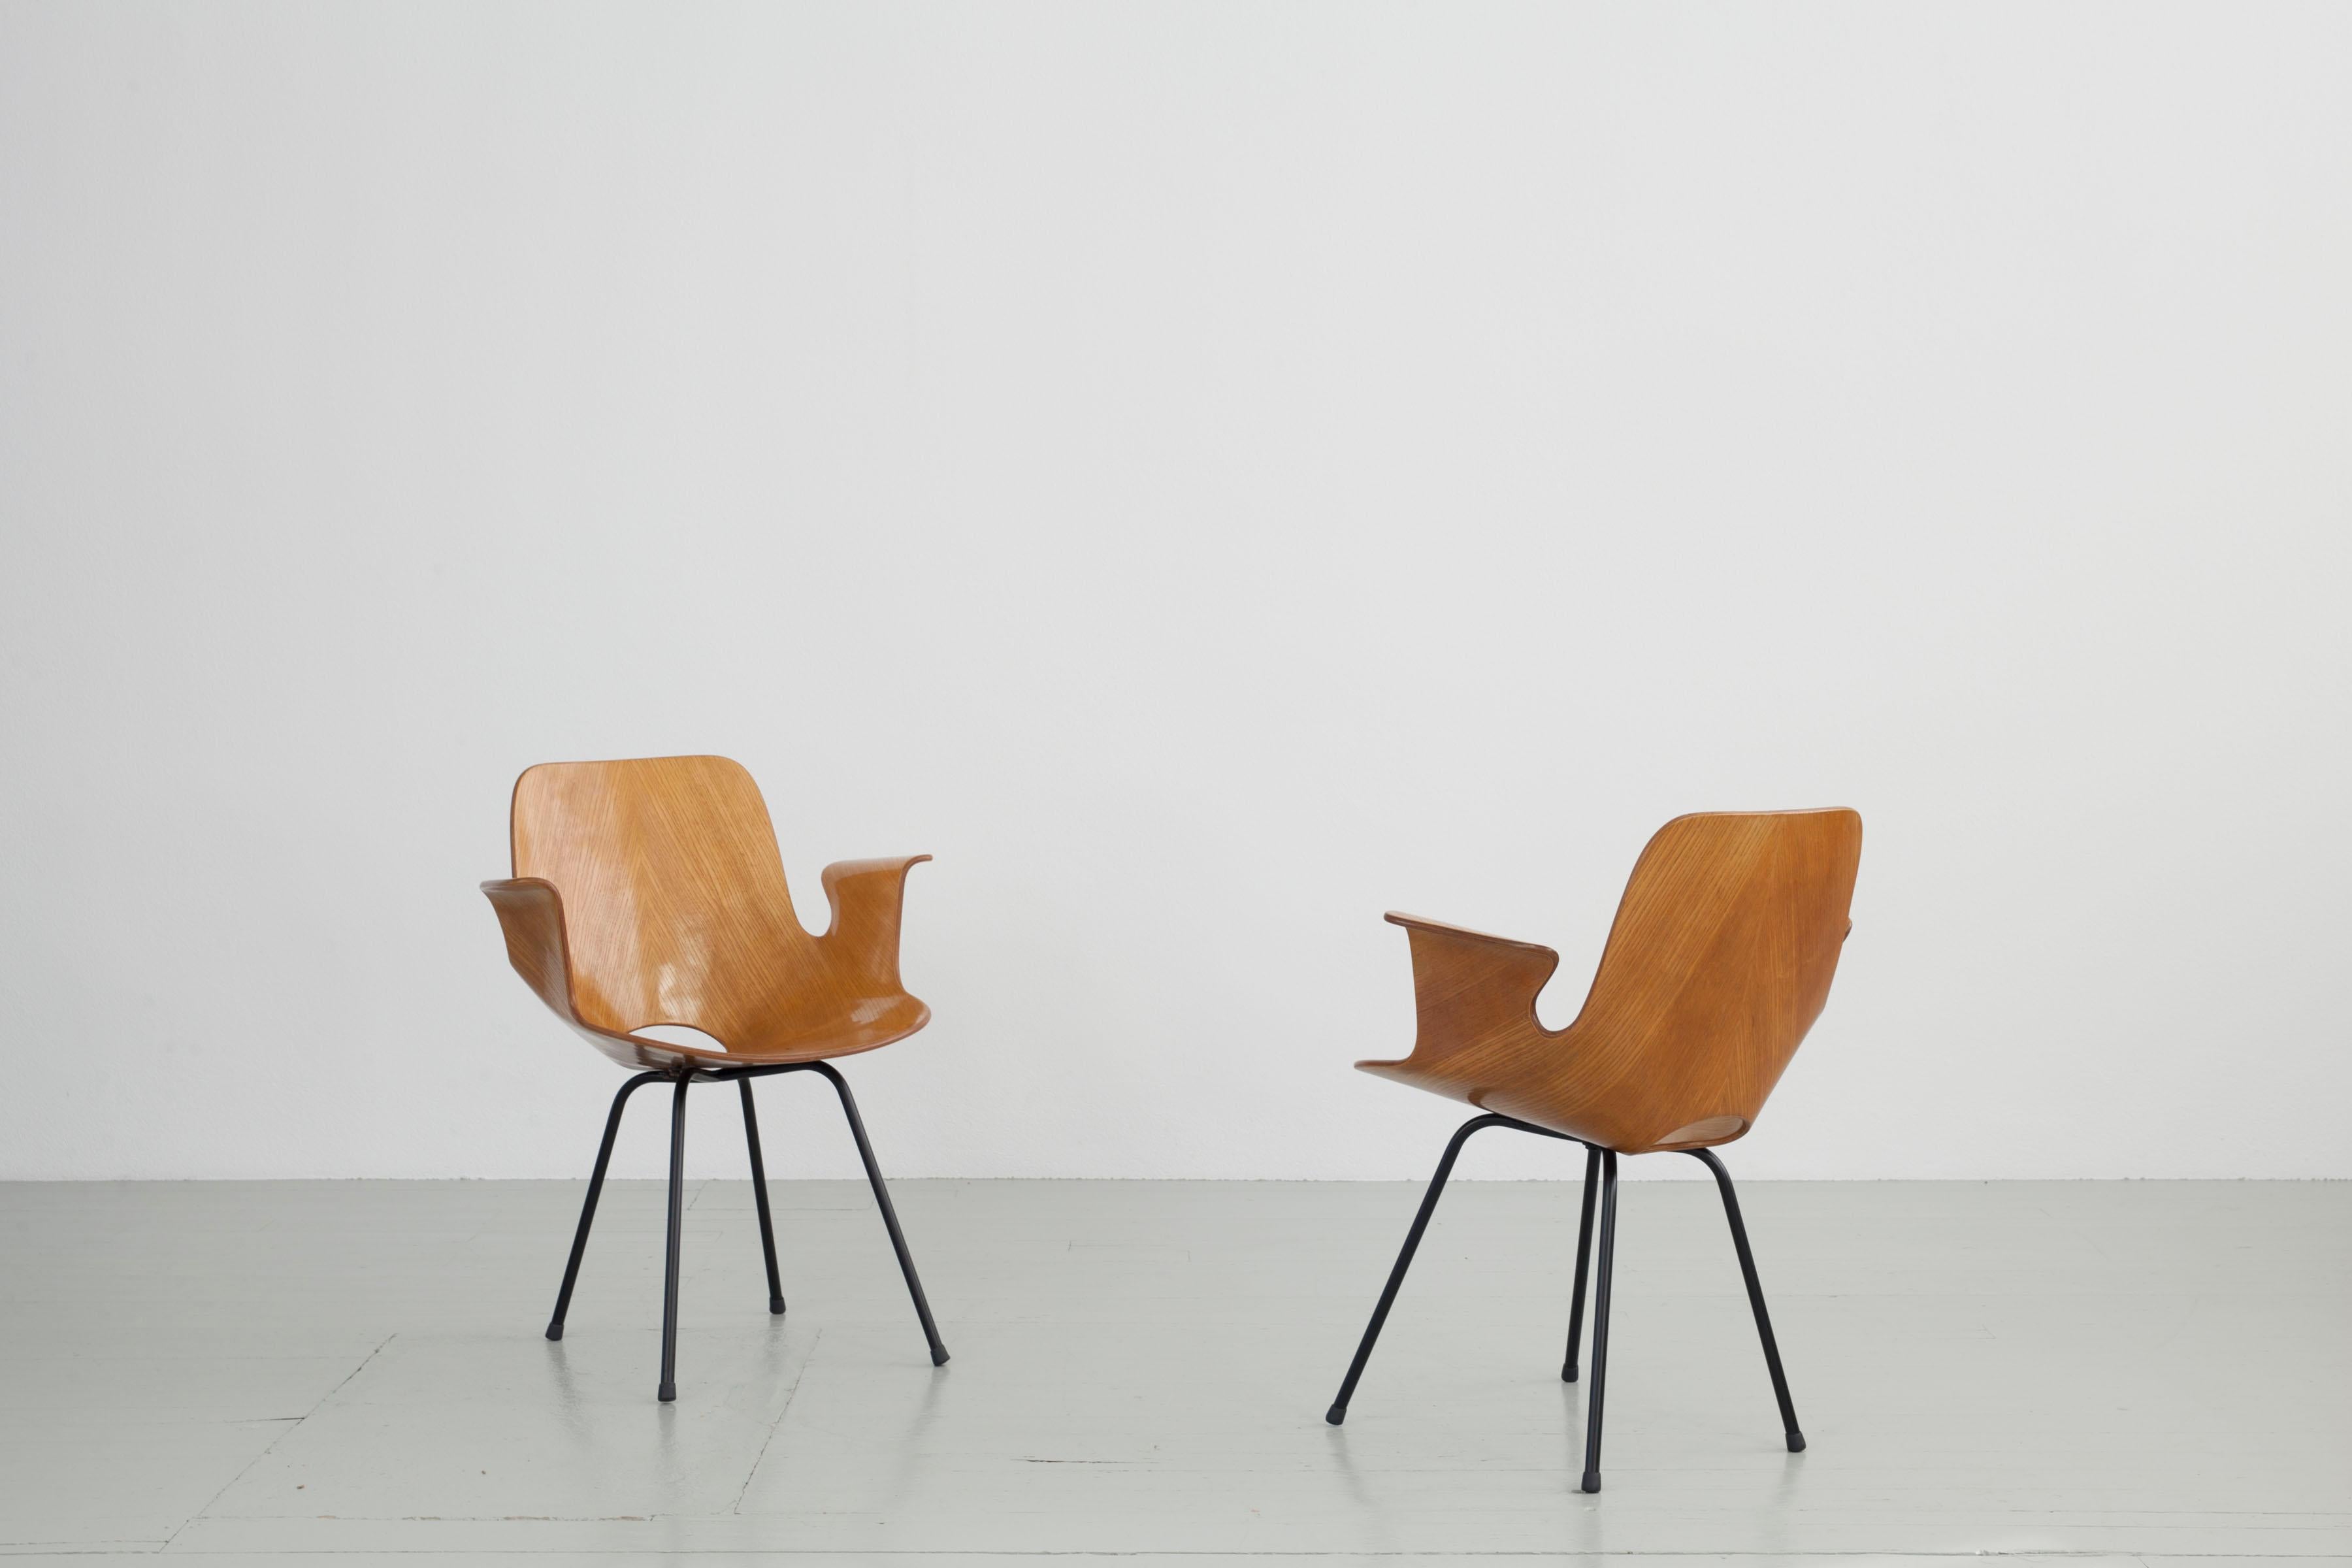  Set of 2 armchairs - Italy, 1954. 1